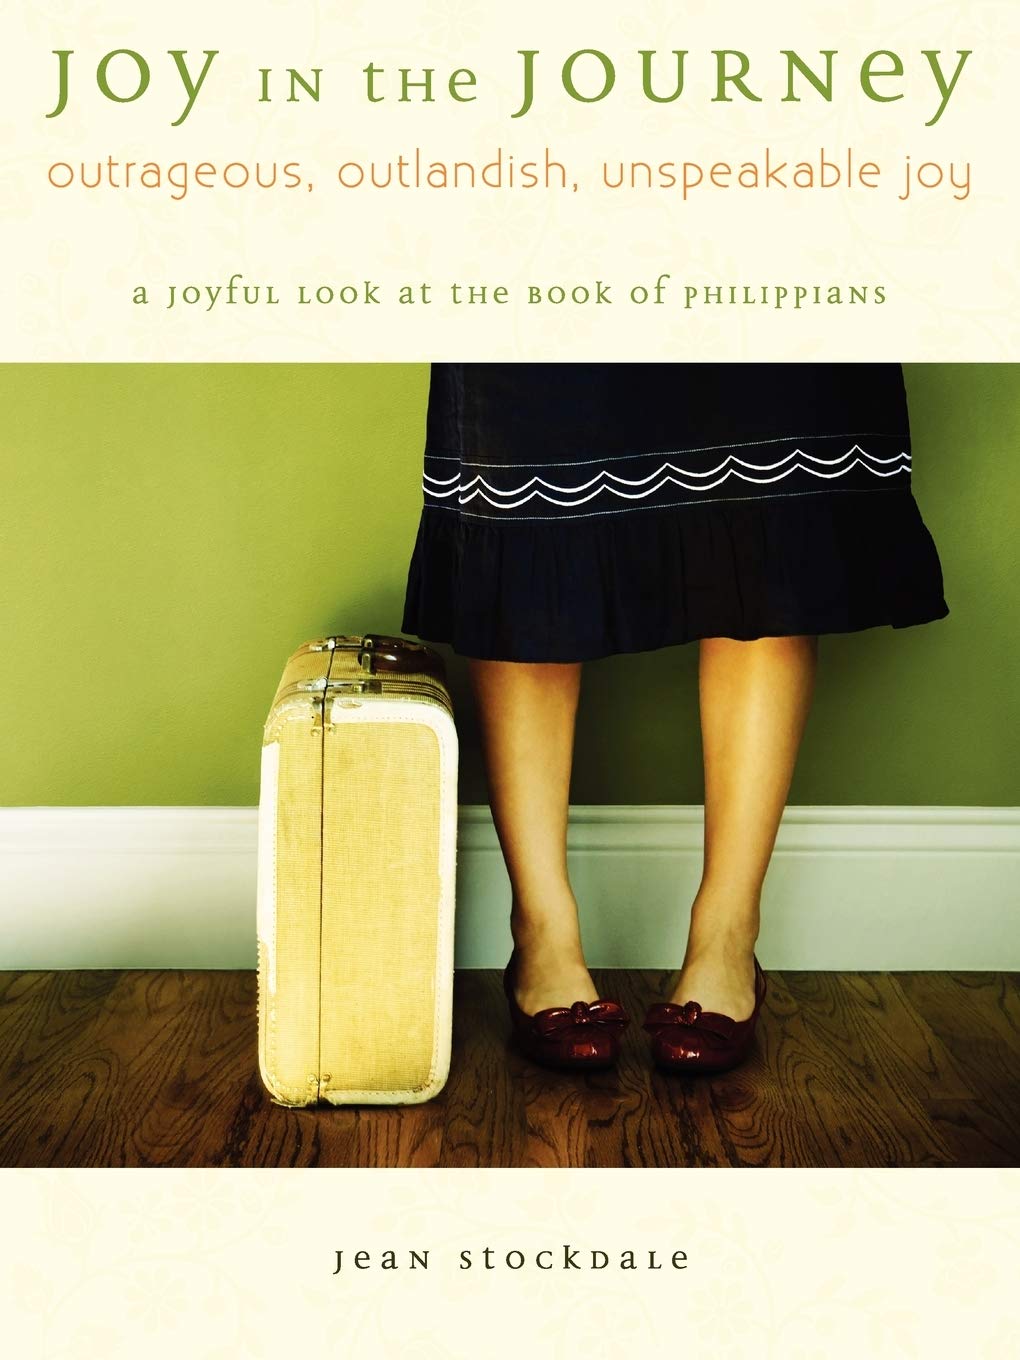 Joy in the Journey: A Joyful Look at the Book of Philippians